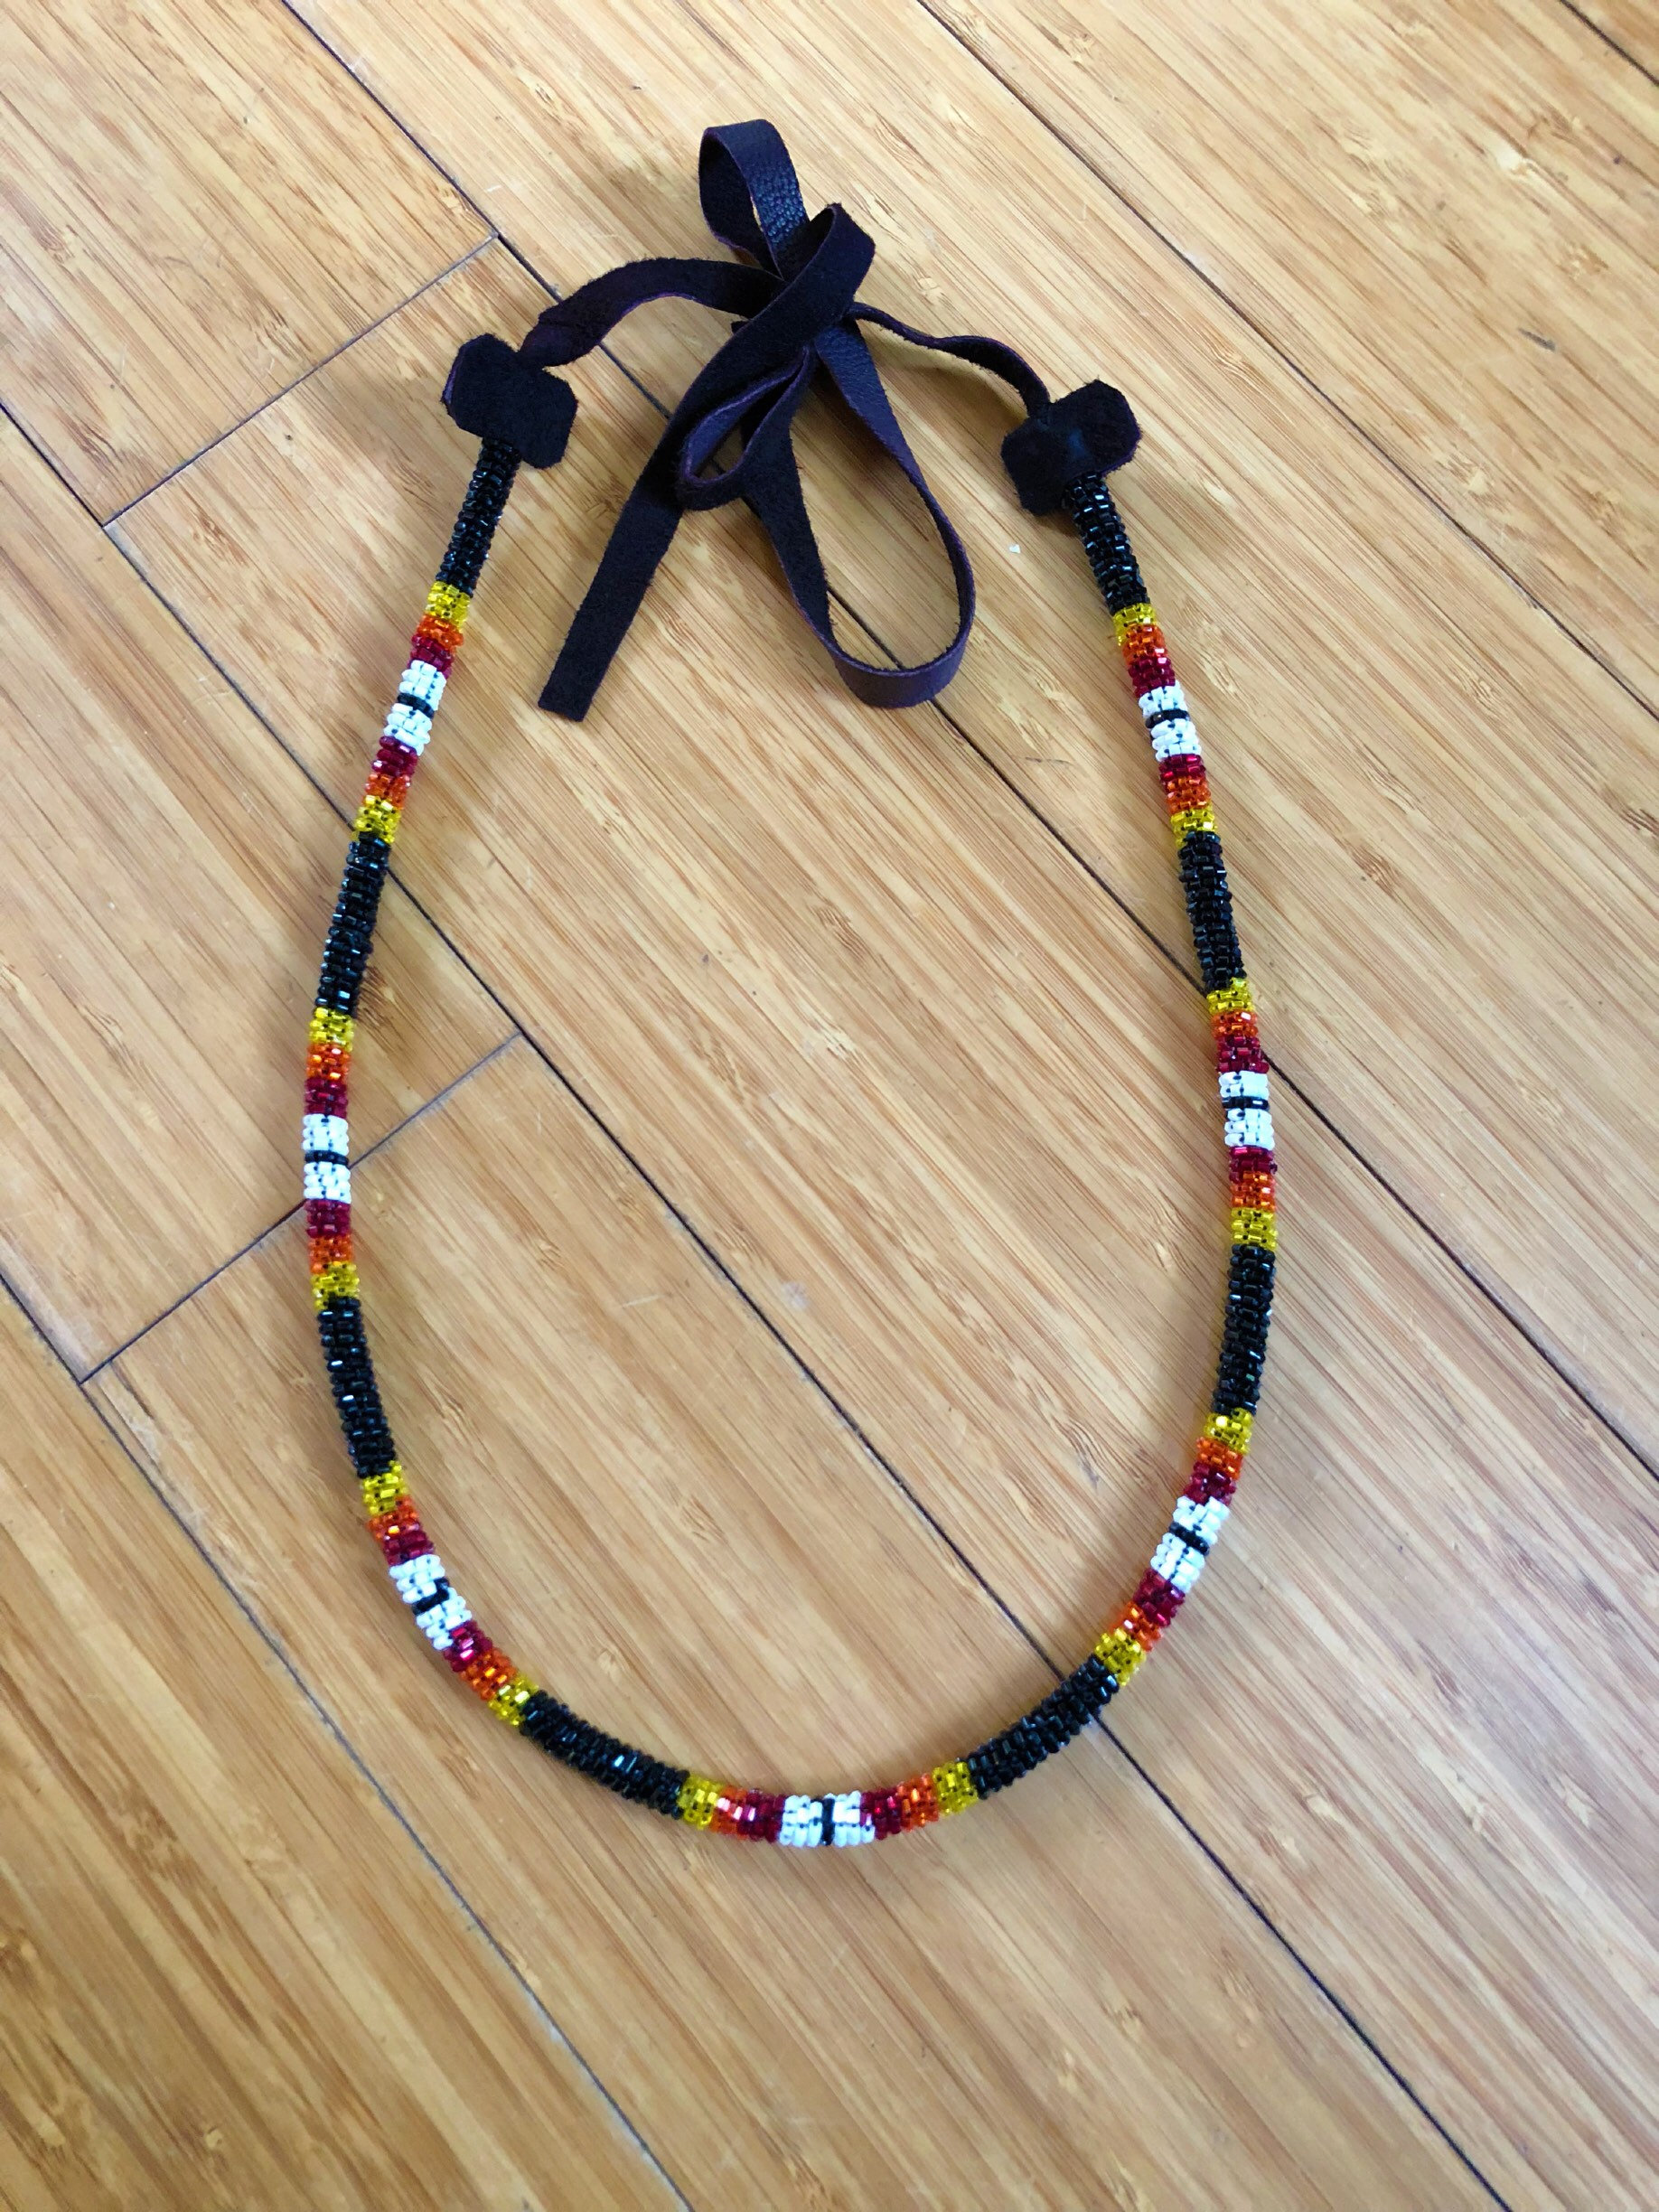 Discover 78+ native american beaded rope necklace - POPPY